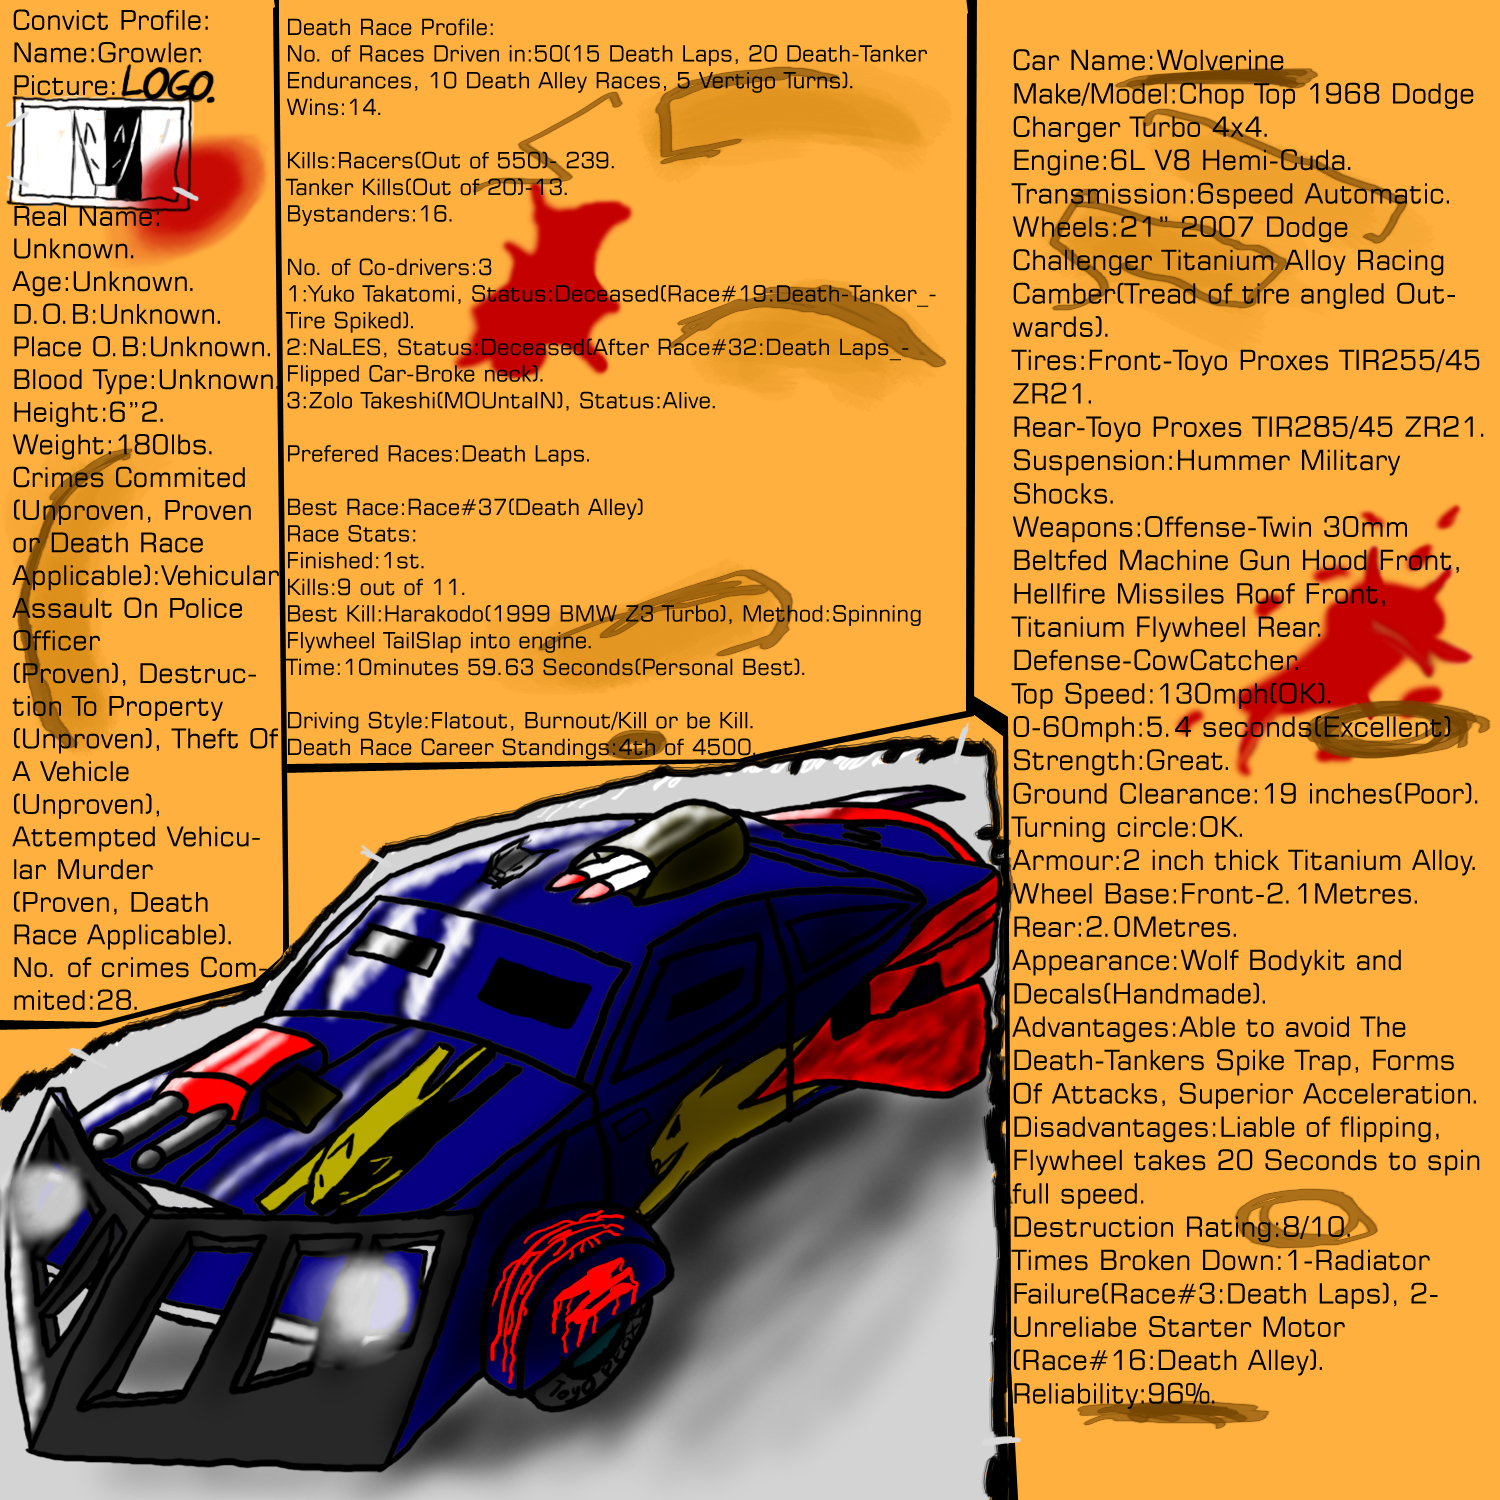 My Death Race Profile. by shadowsofvoltage